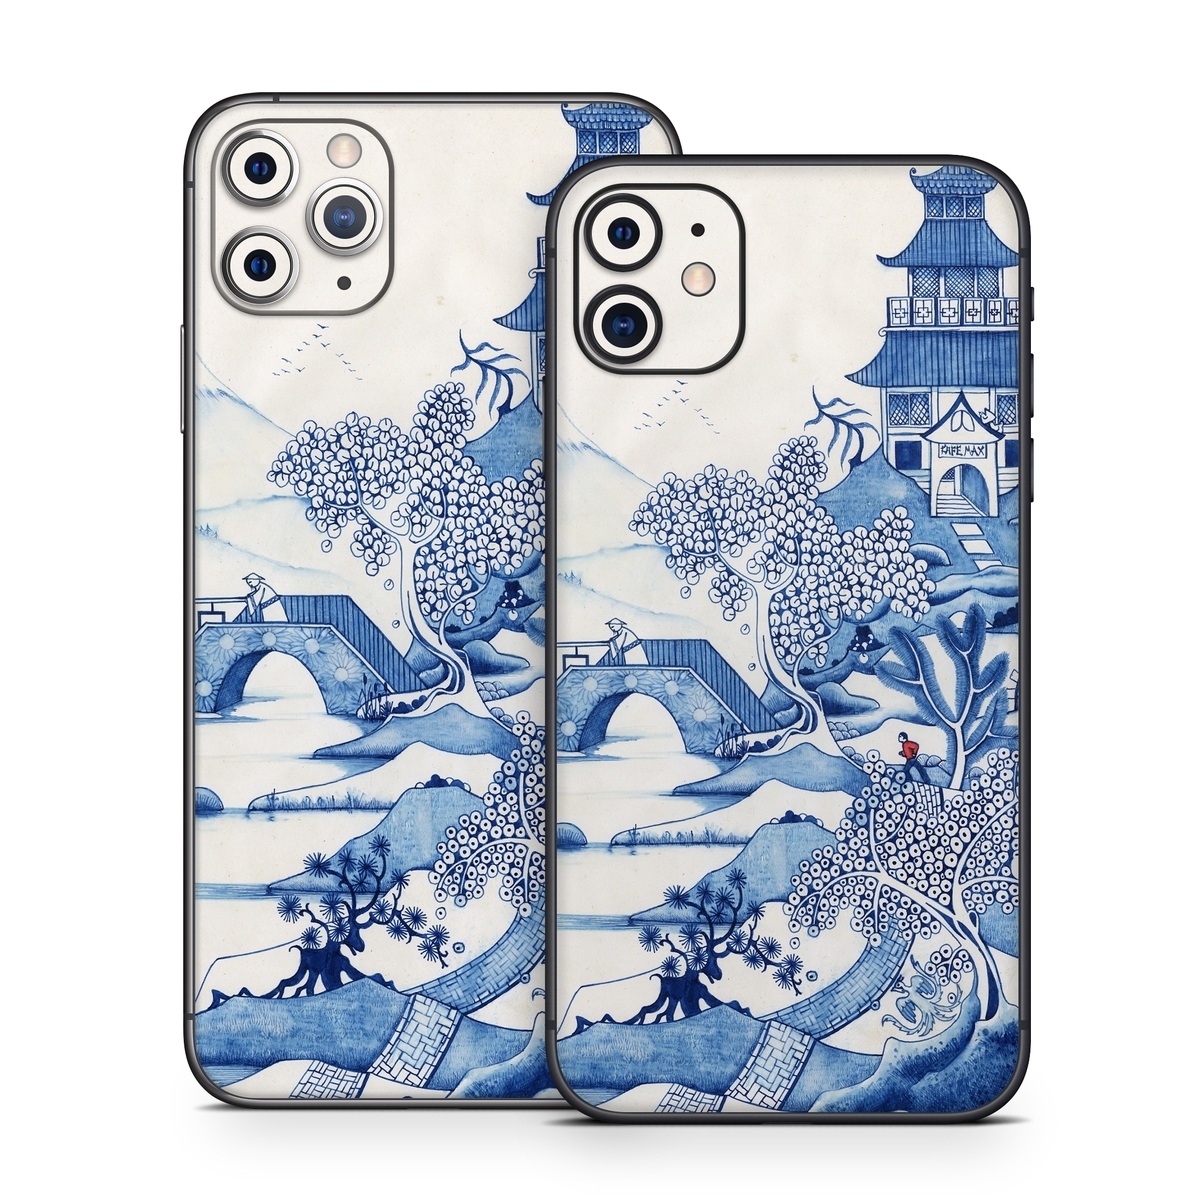  Skin design of Blue, Blue and white porcelain, Winter, Christmas eve, Illustration, Snow, World, Art, with blue, white colors